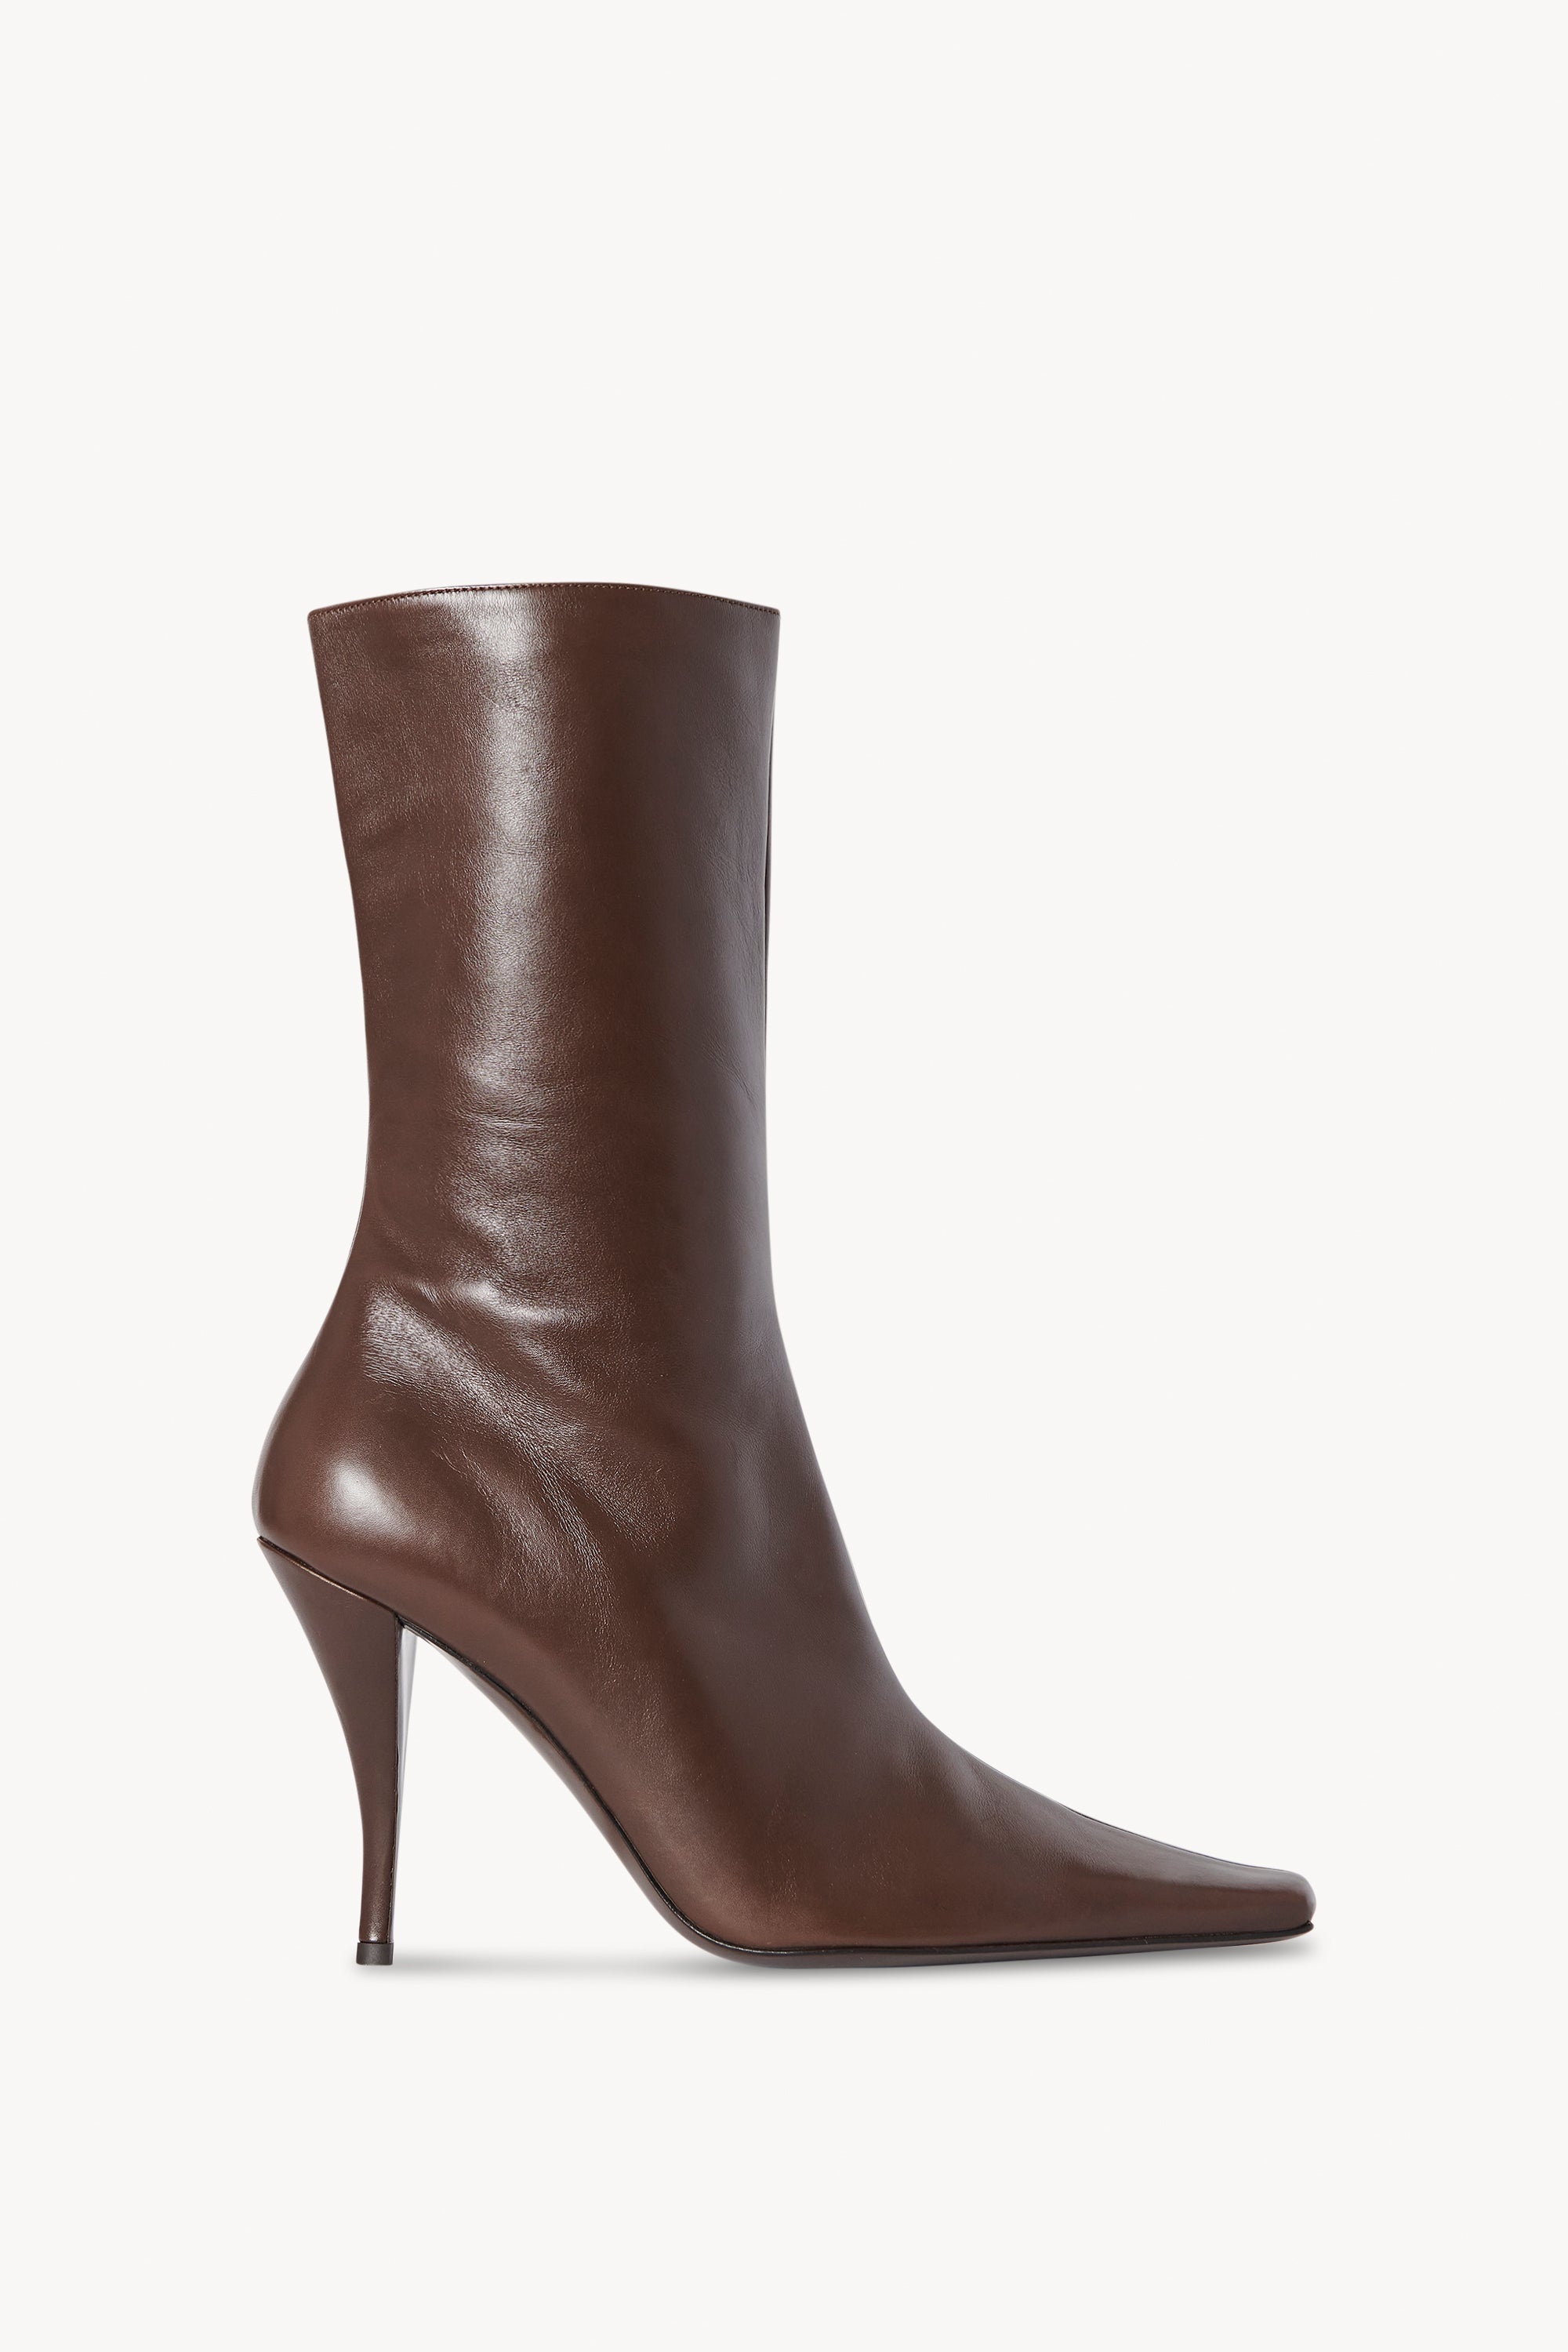 Shrimpton High Boot in Leather - 1